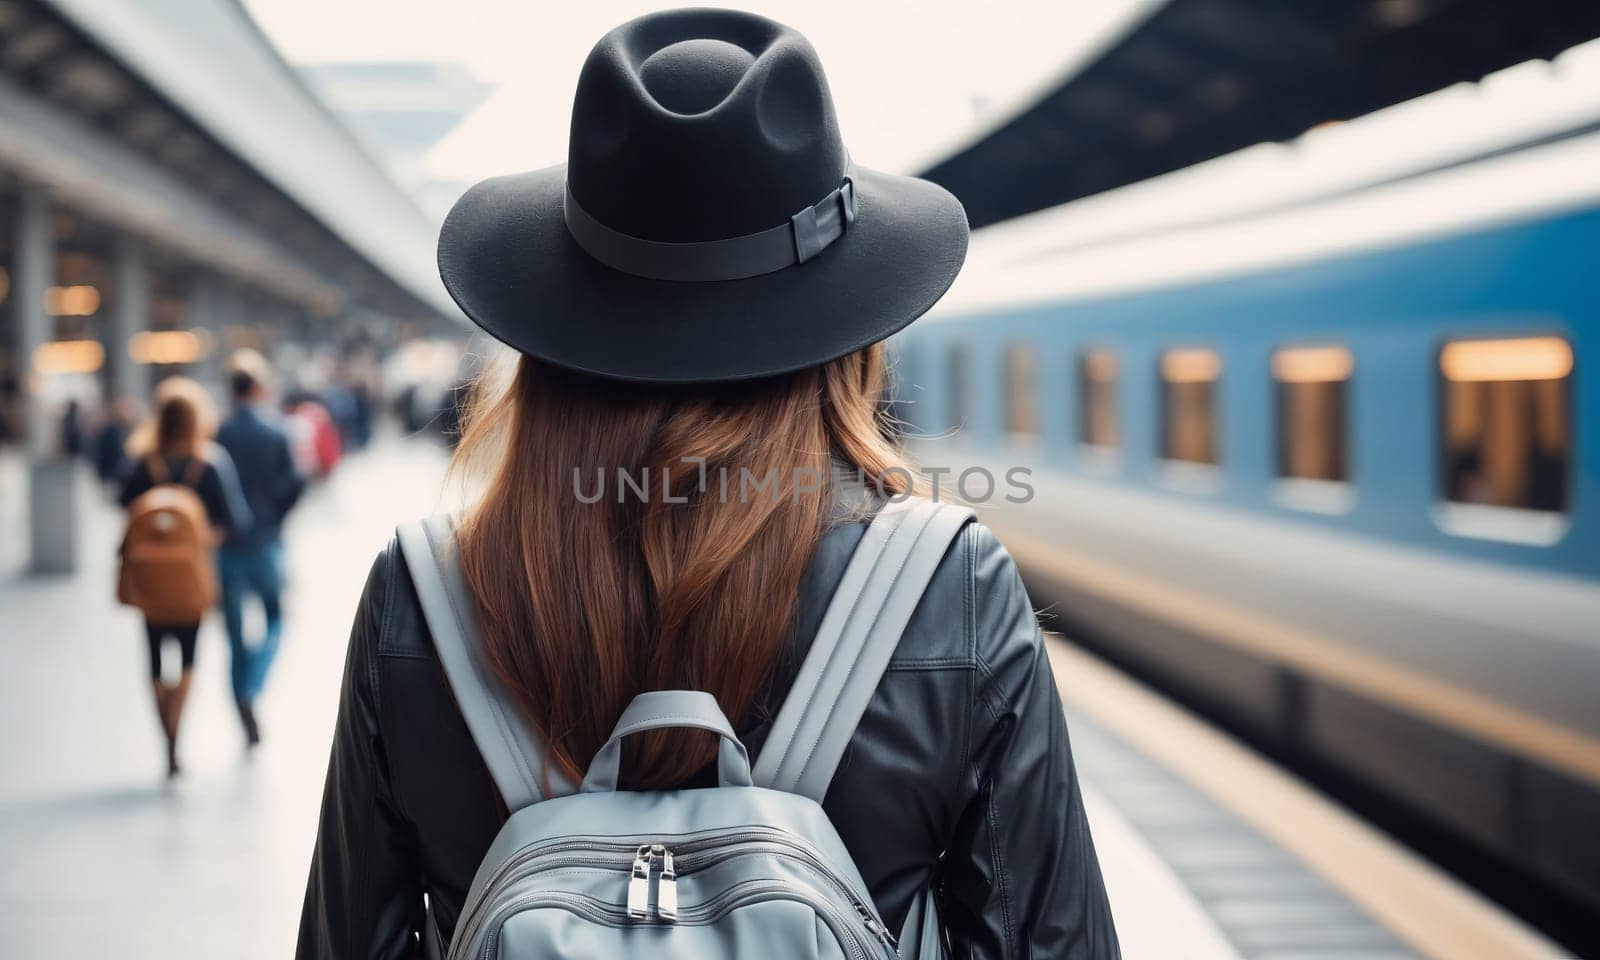 A traveler adorned in a hat and backpack waits on a busy train station platform. The blue train and bustling passengers paint a scene of urban transit.